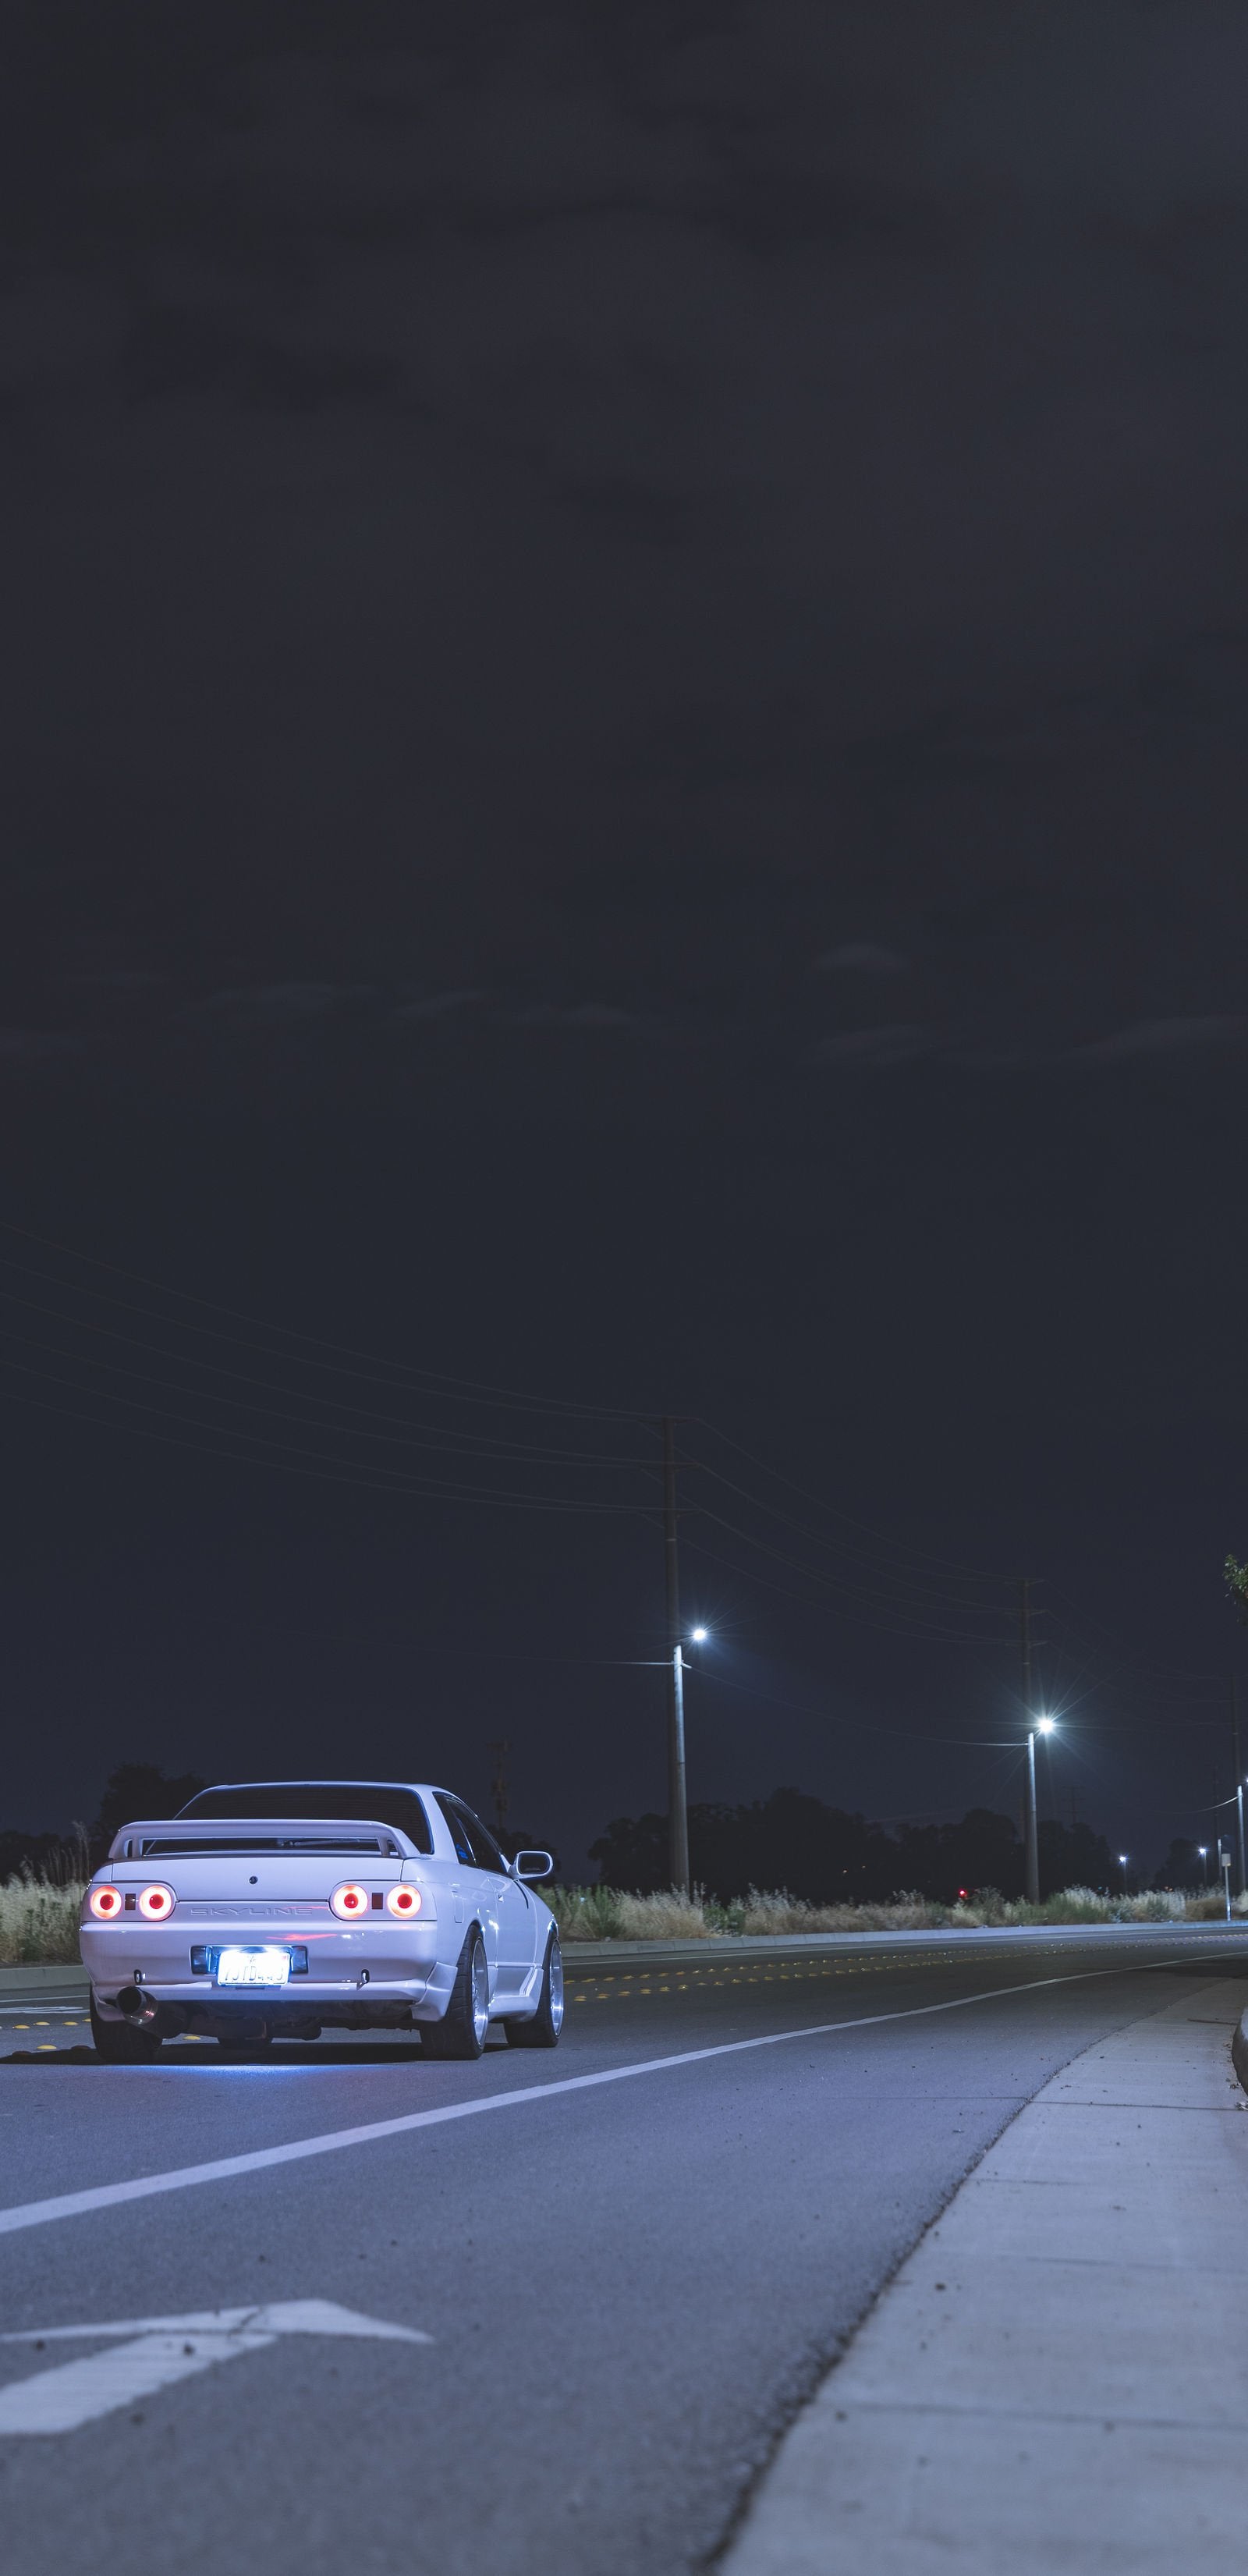 My Super High Res JDM Phone Wallpaper On IG